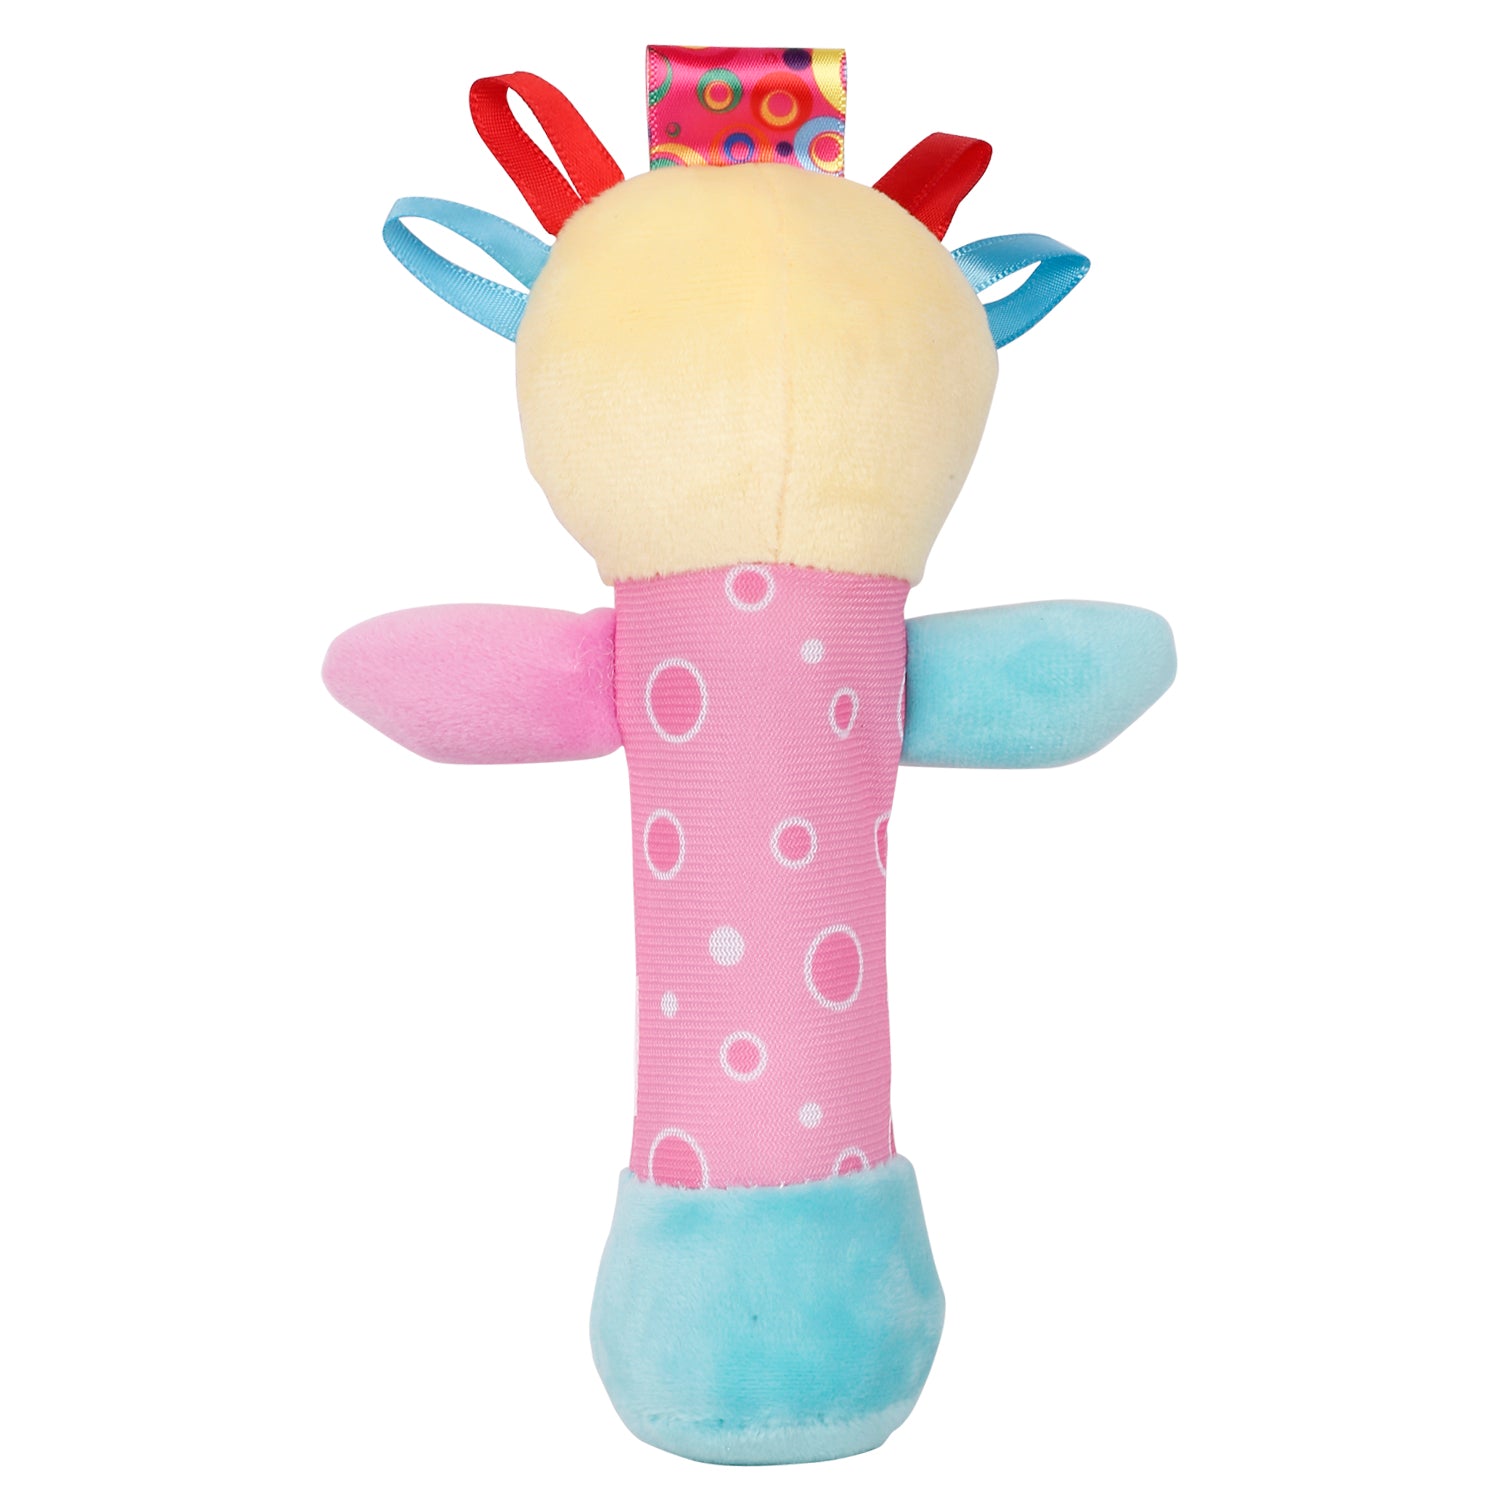 Papa Duck Multicolour Handheld Rattle Toy - Baby Moo